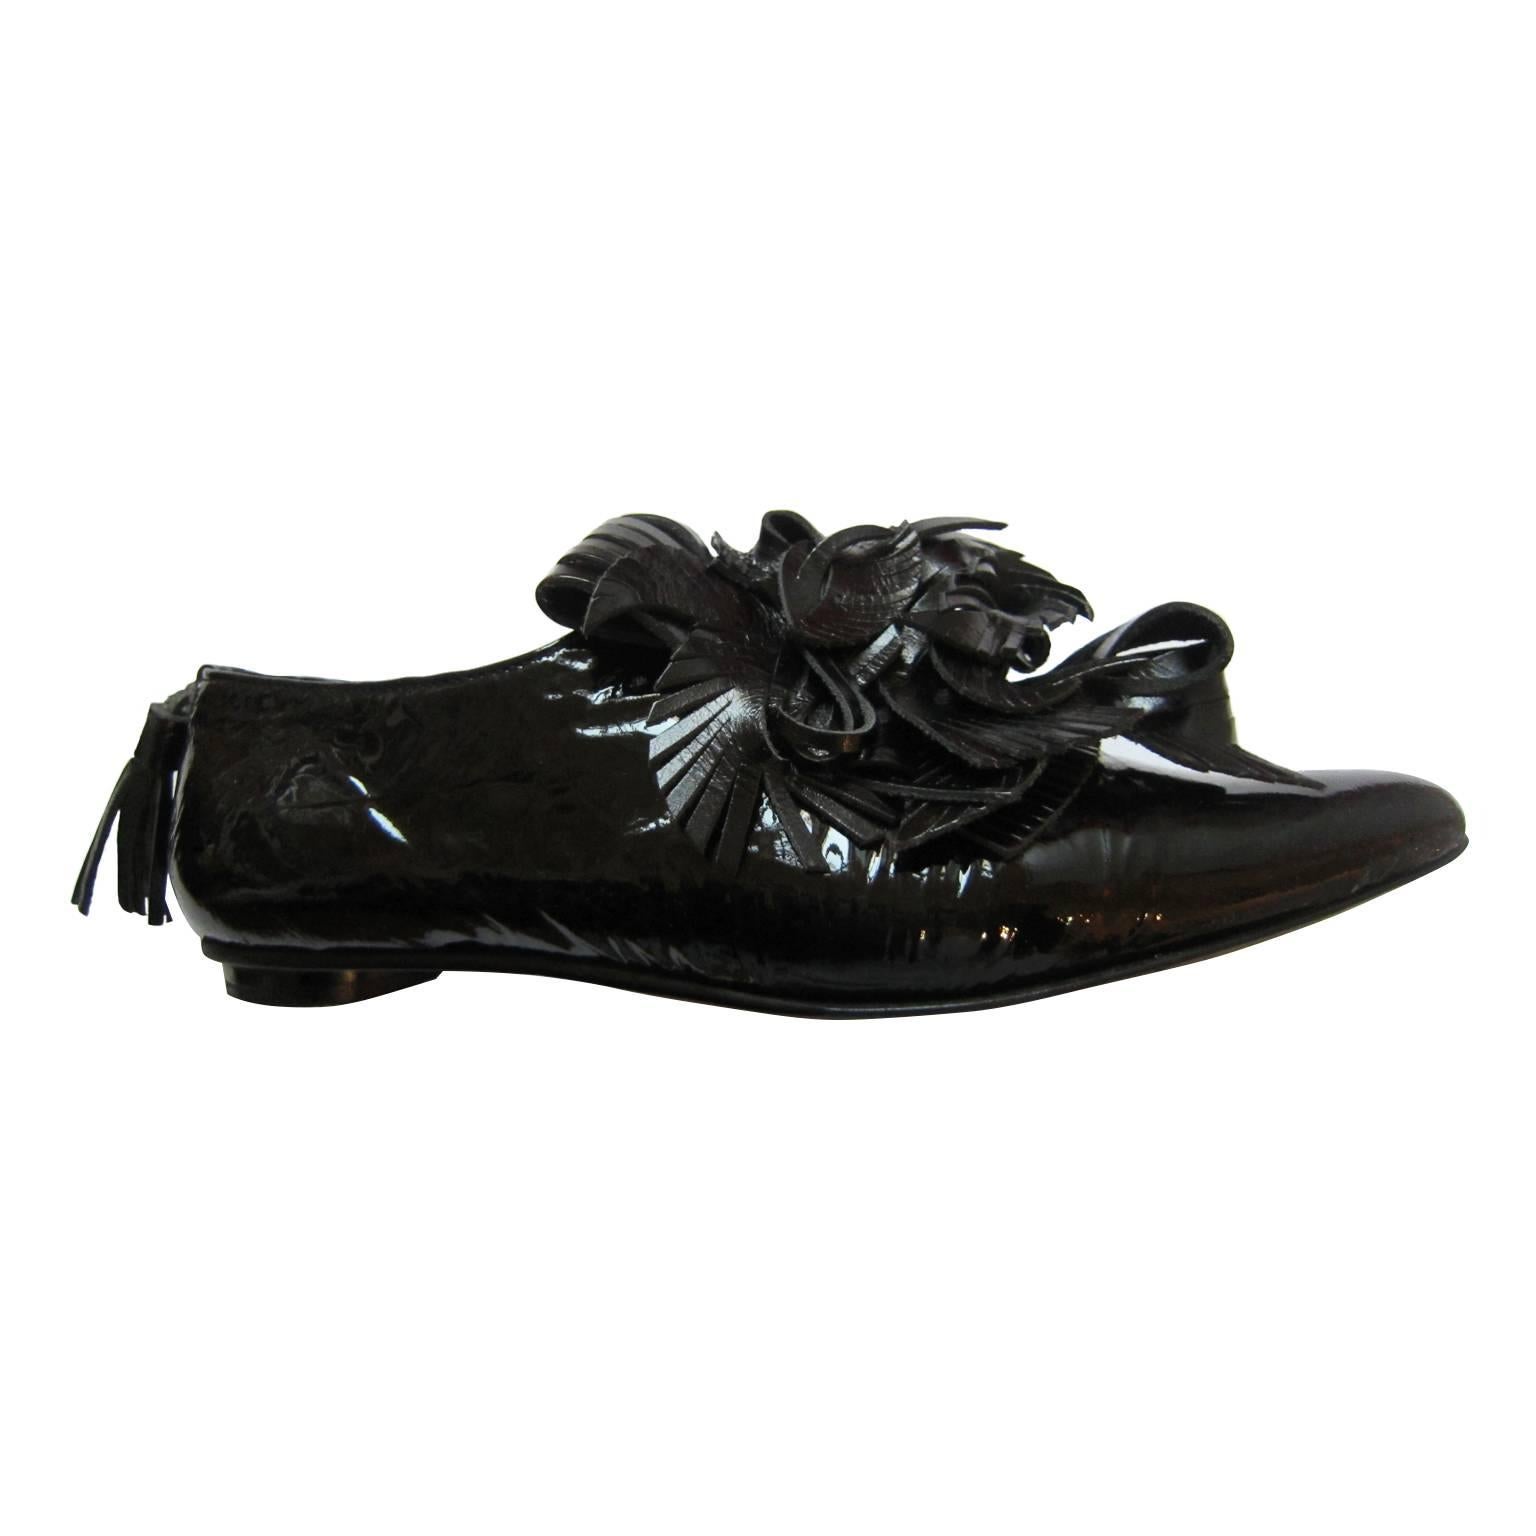 One of a kind Issey Miyake black patent leather flats with amazing leather crafts fringe detail tassel shoes from circa 90s. Abstract yet very calculated design.
Made in Japan. New in Box. 
Original size : 24 cm Japanese 
It fits like 7.5/ 8 US,